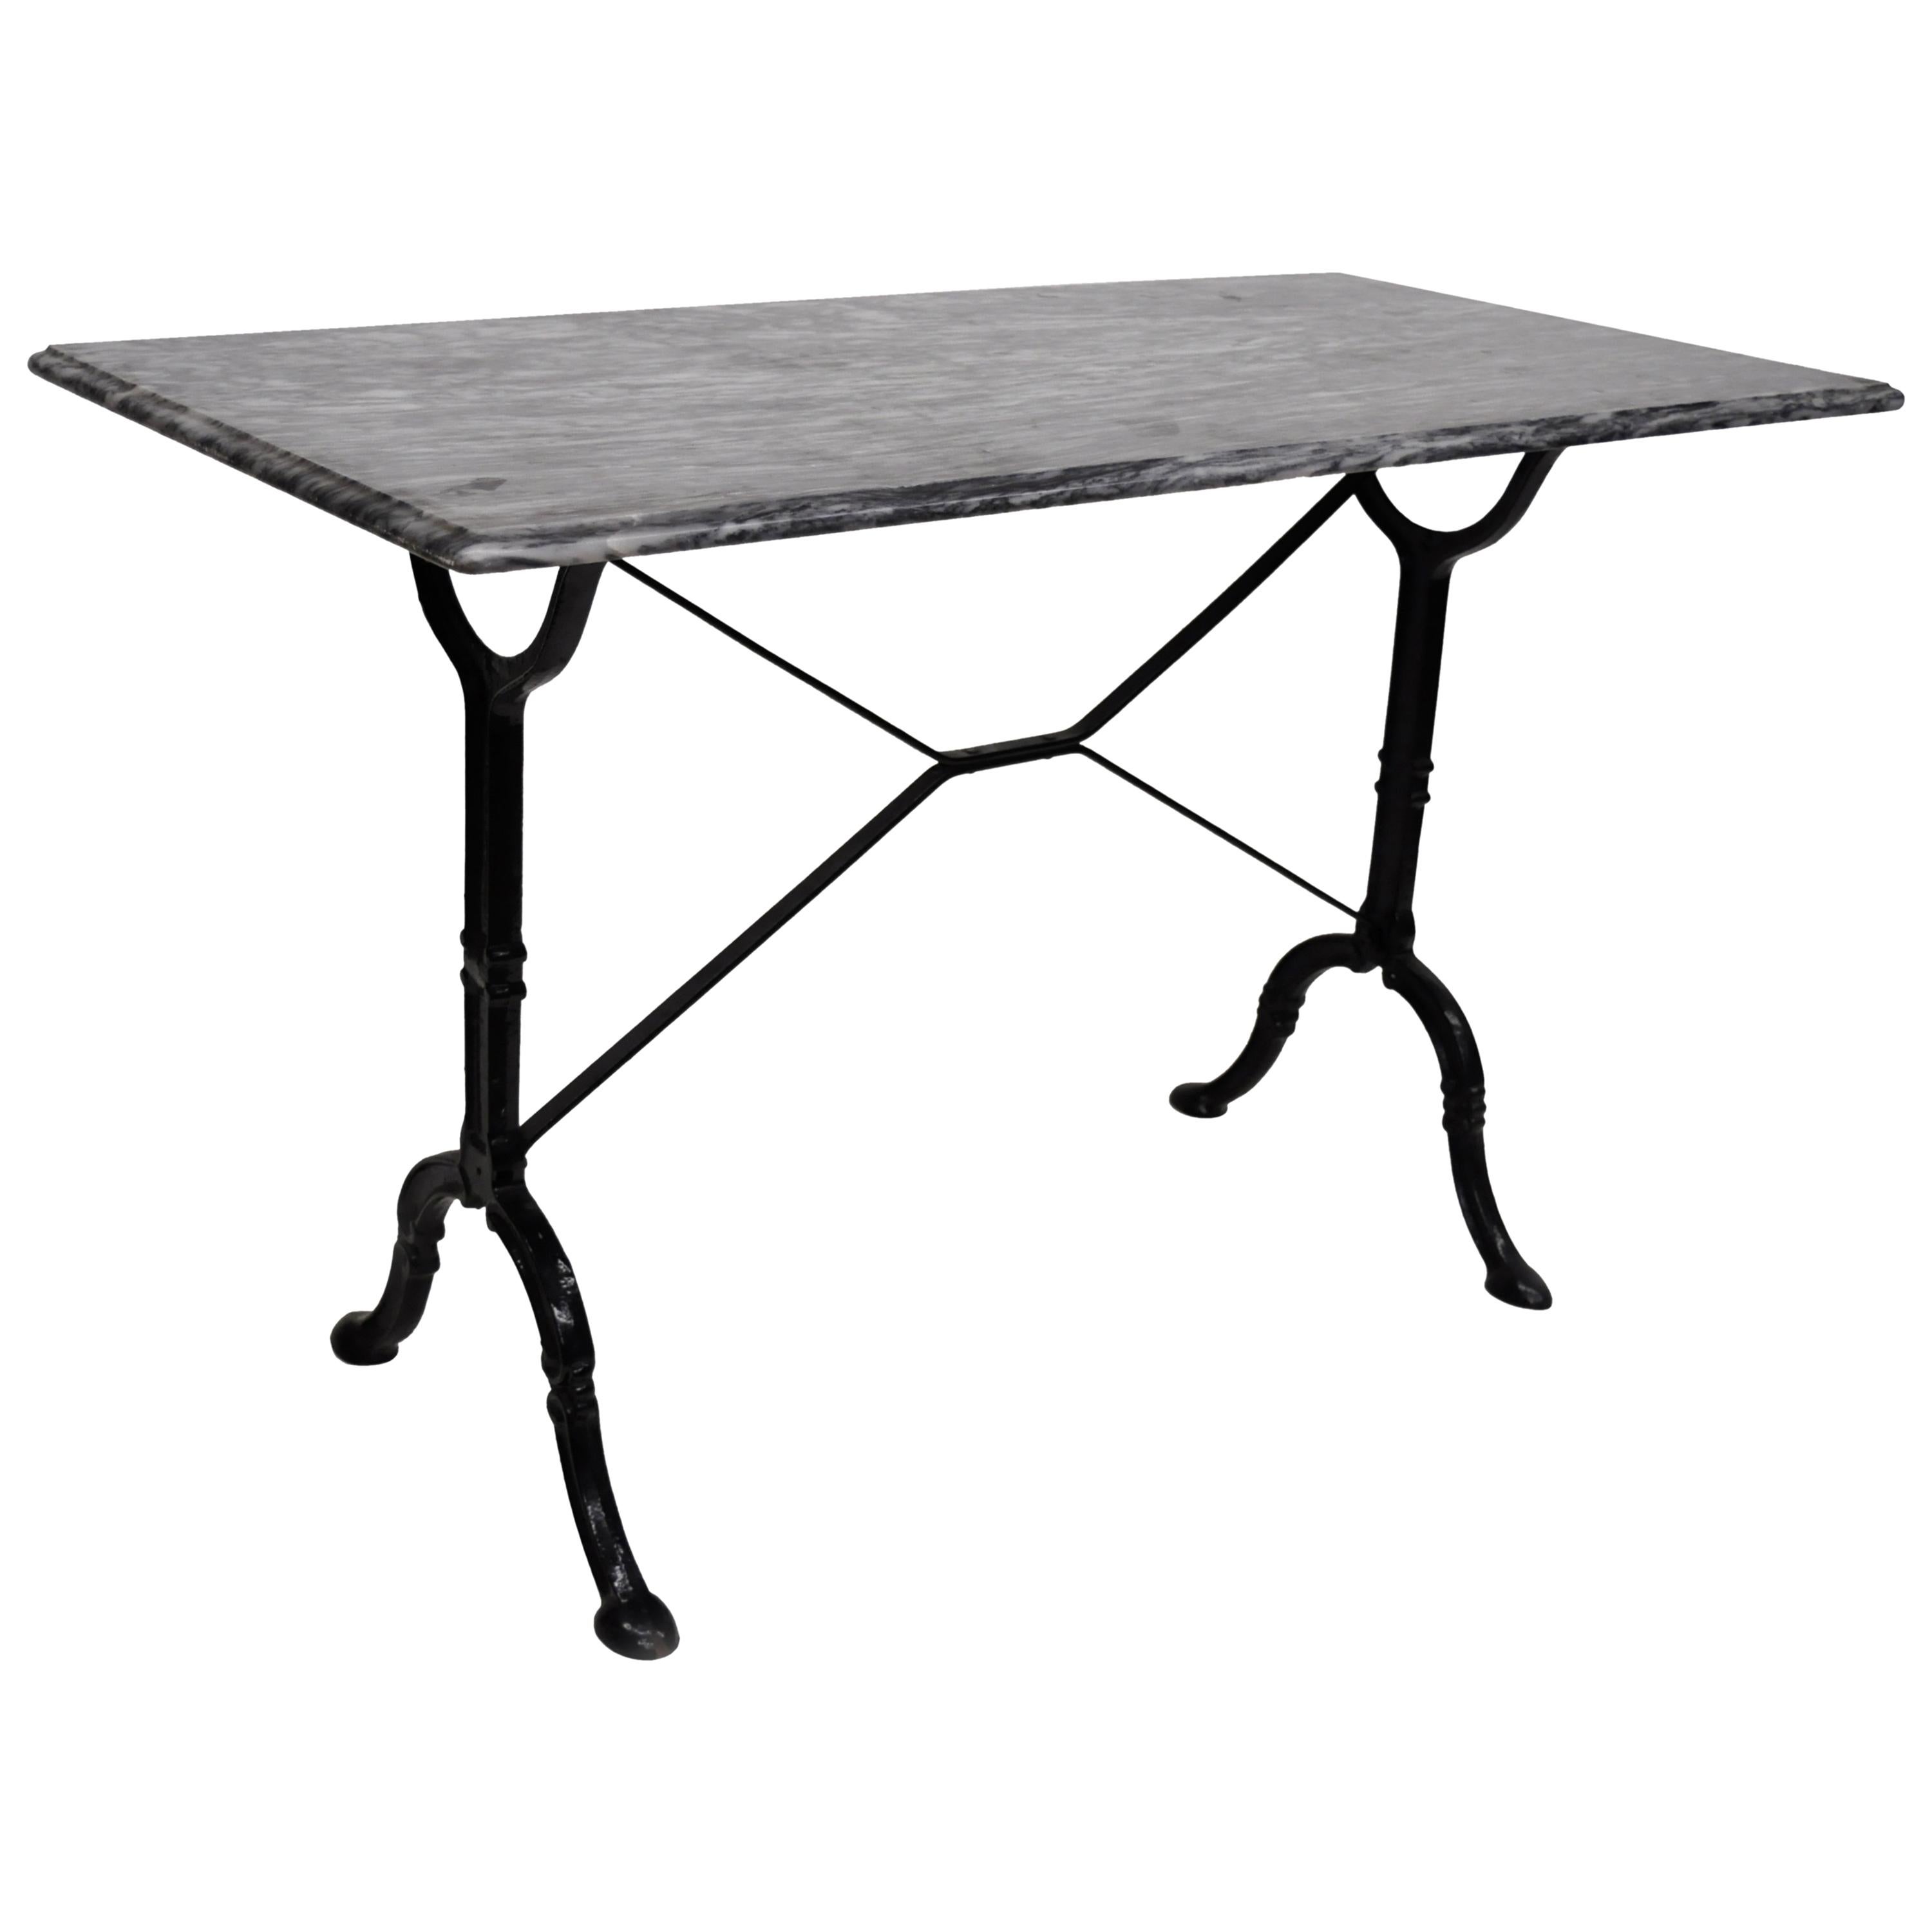 Cast Iron Marble-Top French Pastry Cafe Bistro Dining Table Desk